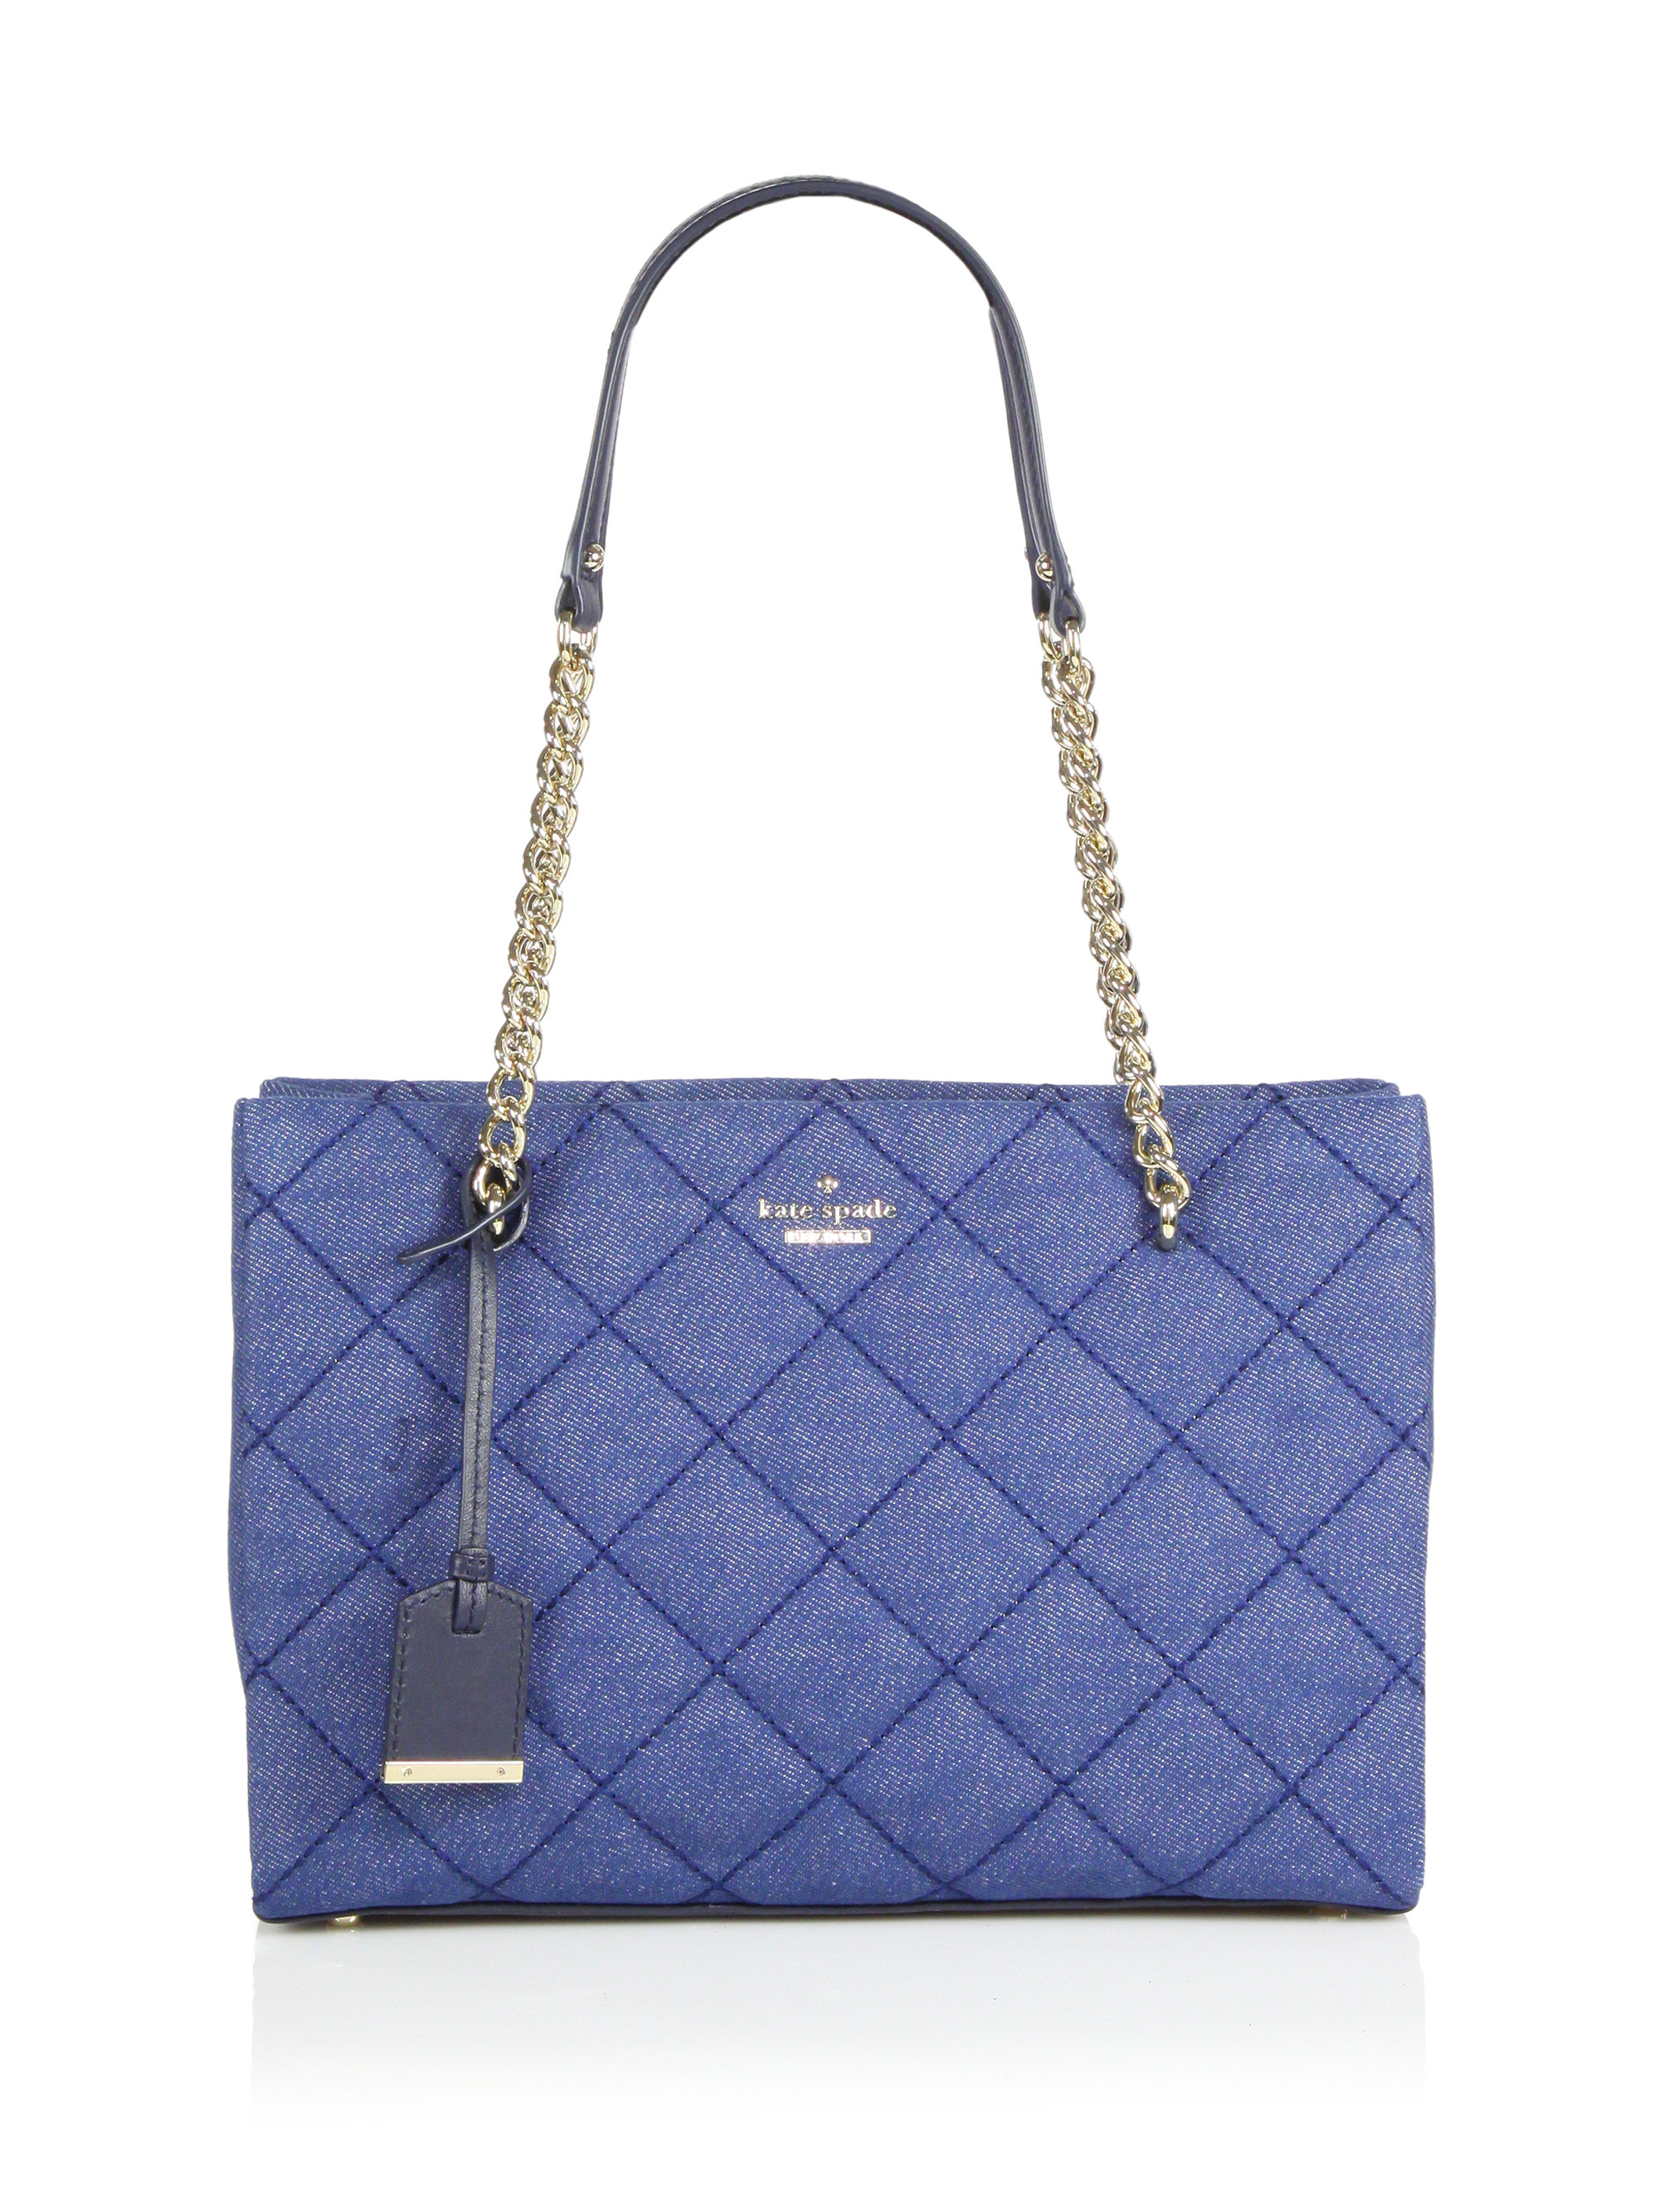 Lyst - Kate Spade New York Emerson Place Phoebe Small Quilted Denim